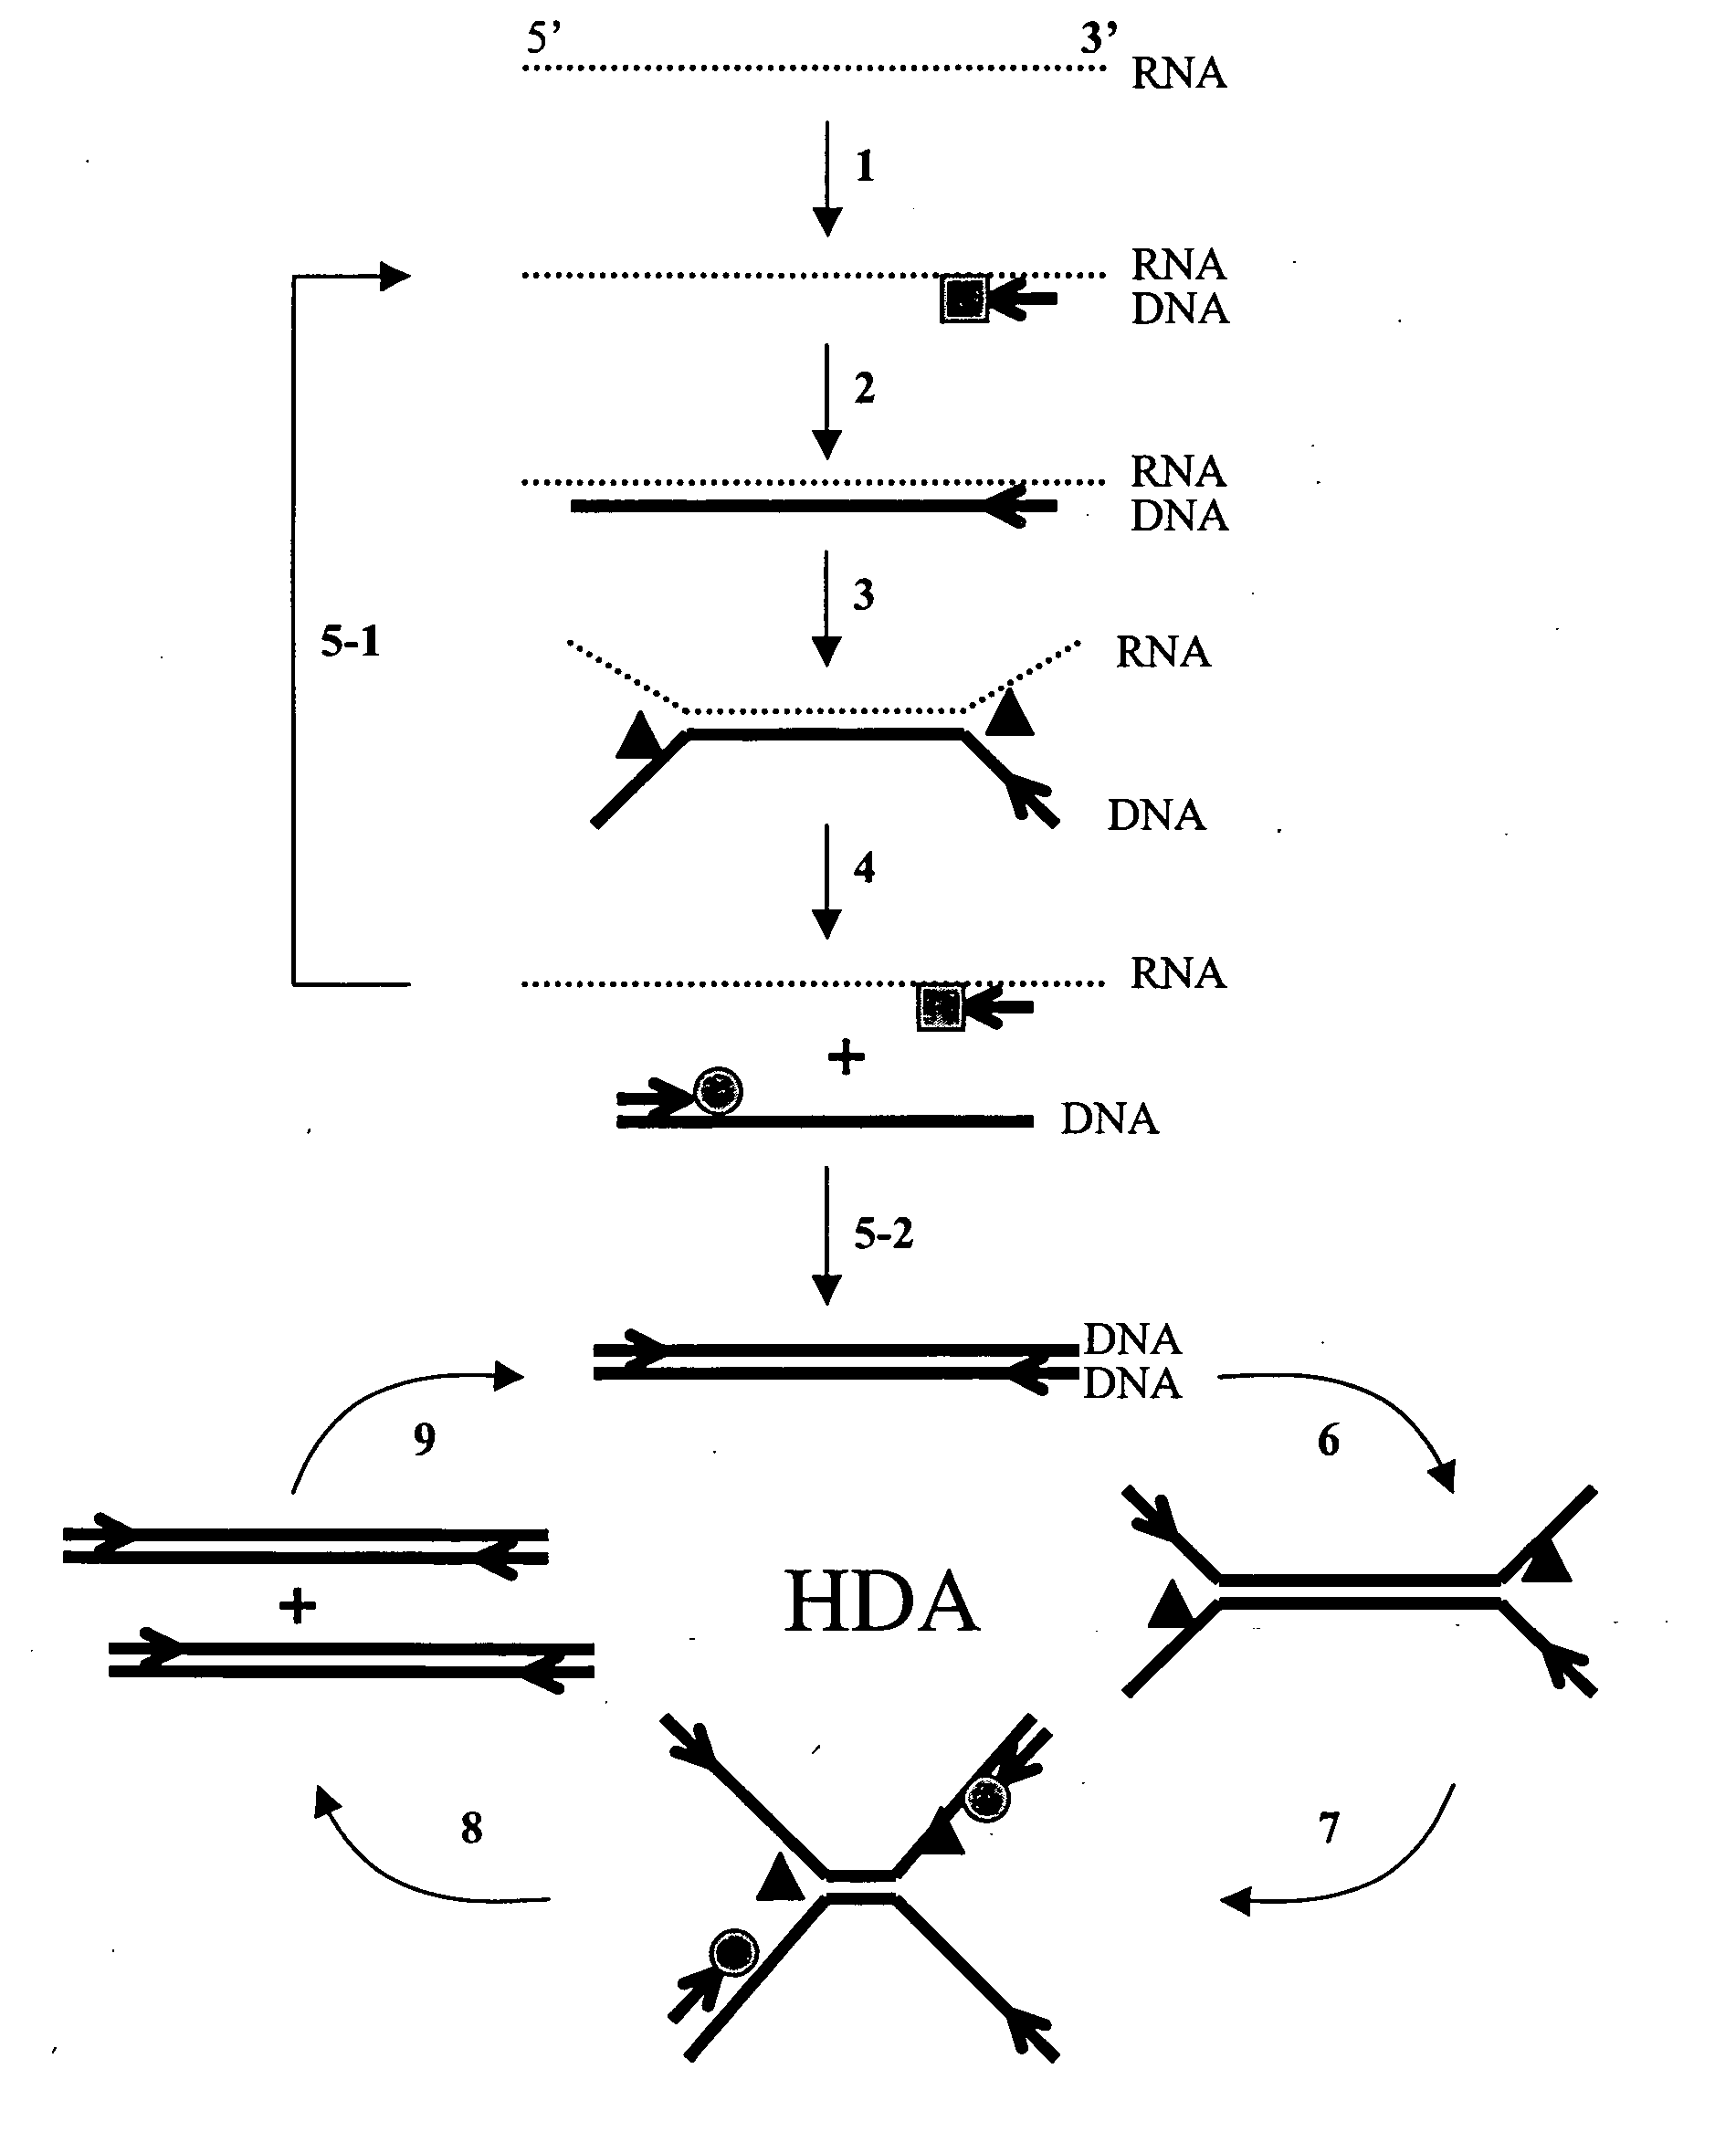 Helicase-dependent amplification of nucleic acids